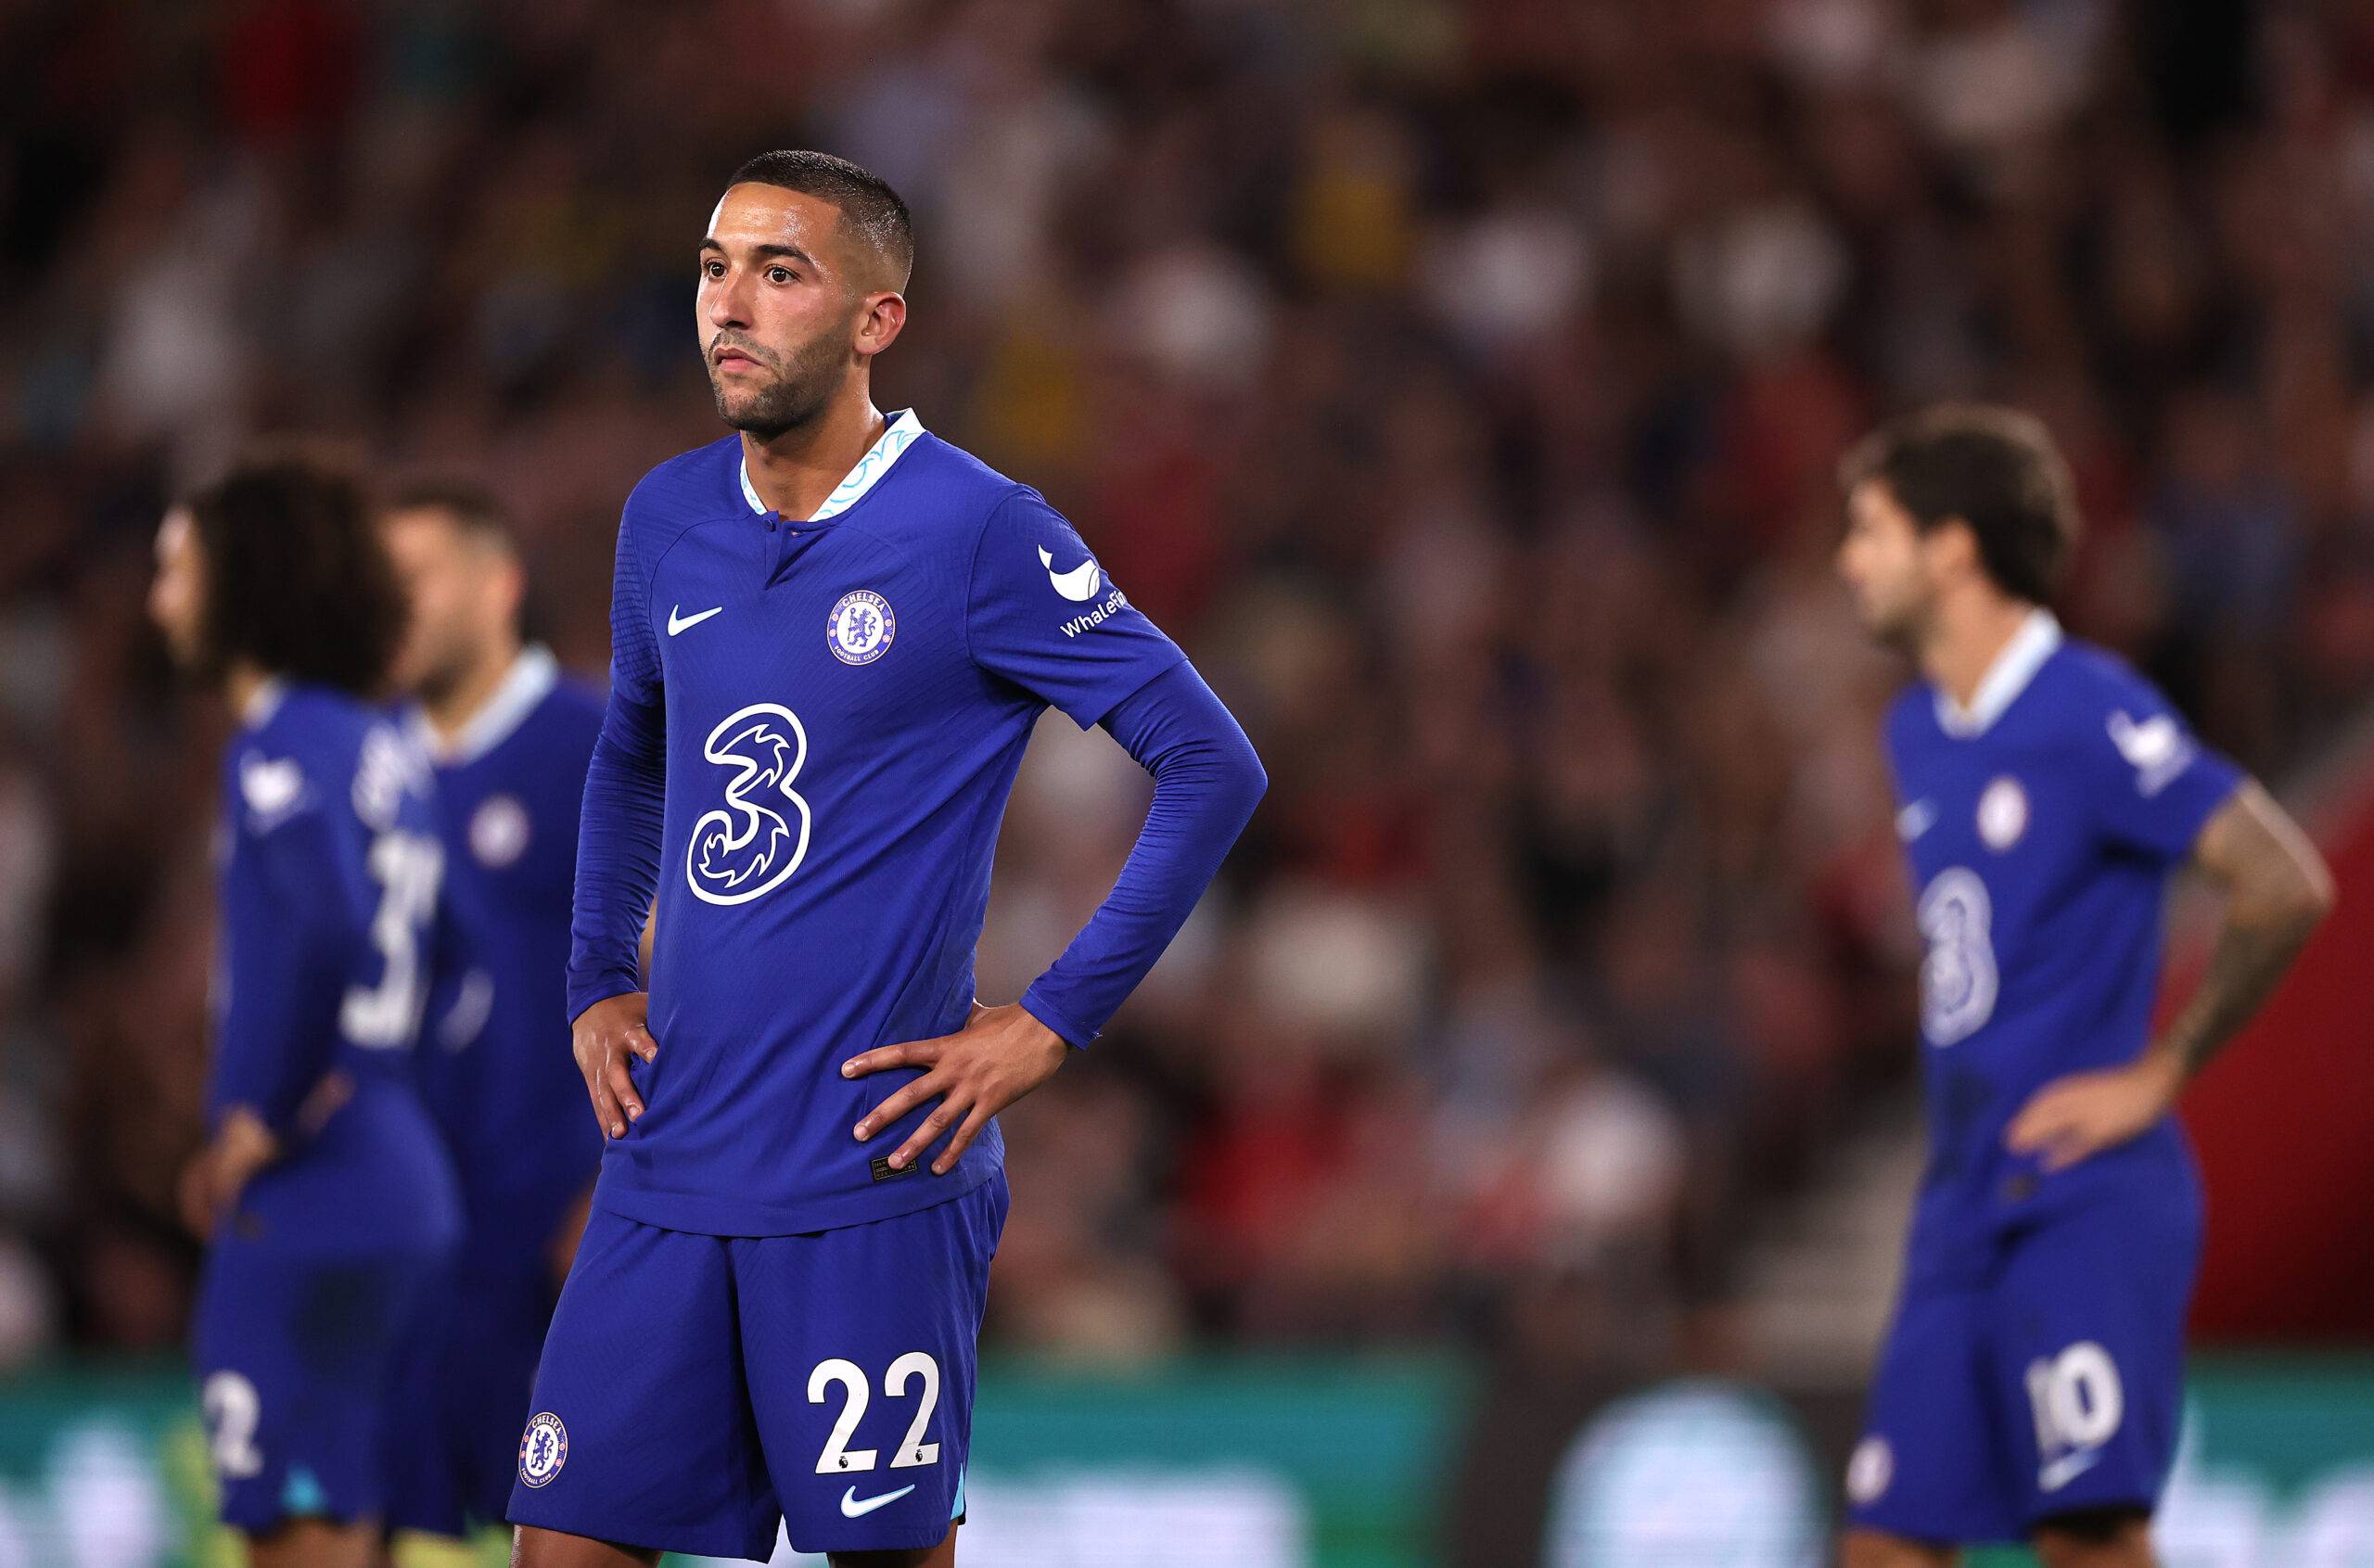 SOUTHAMPTON, ENGLAND - AUGUST 30: Hakim Ziyech of Chelsea looks on during the Premier League match between Southampton FC and Chelsea FC at Friends Provident St. Mary's Stadium on August 30, 2022 in Southampton, England. (Photo by Ryan Pierse/Getty Images)